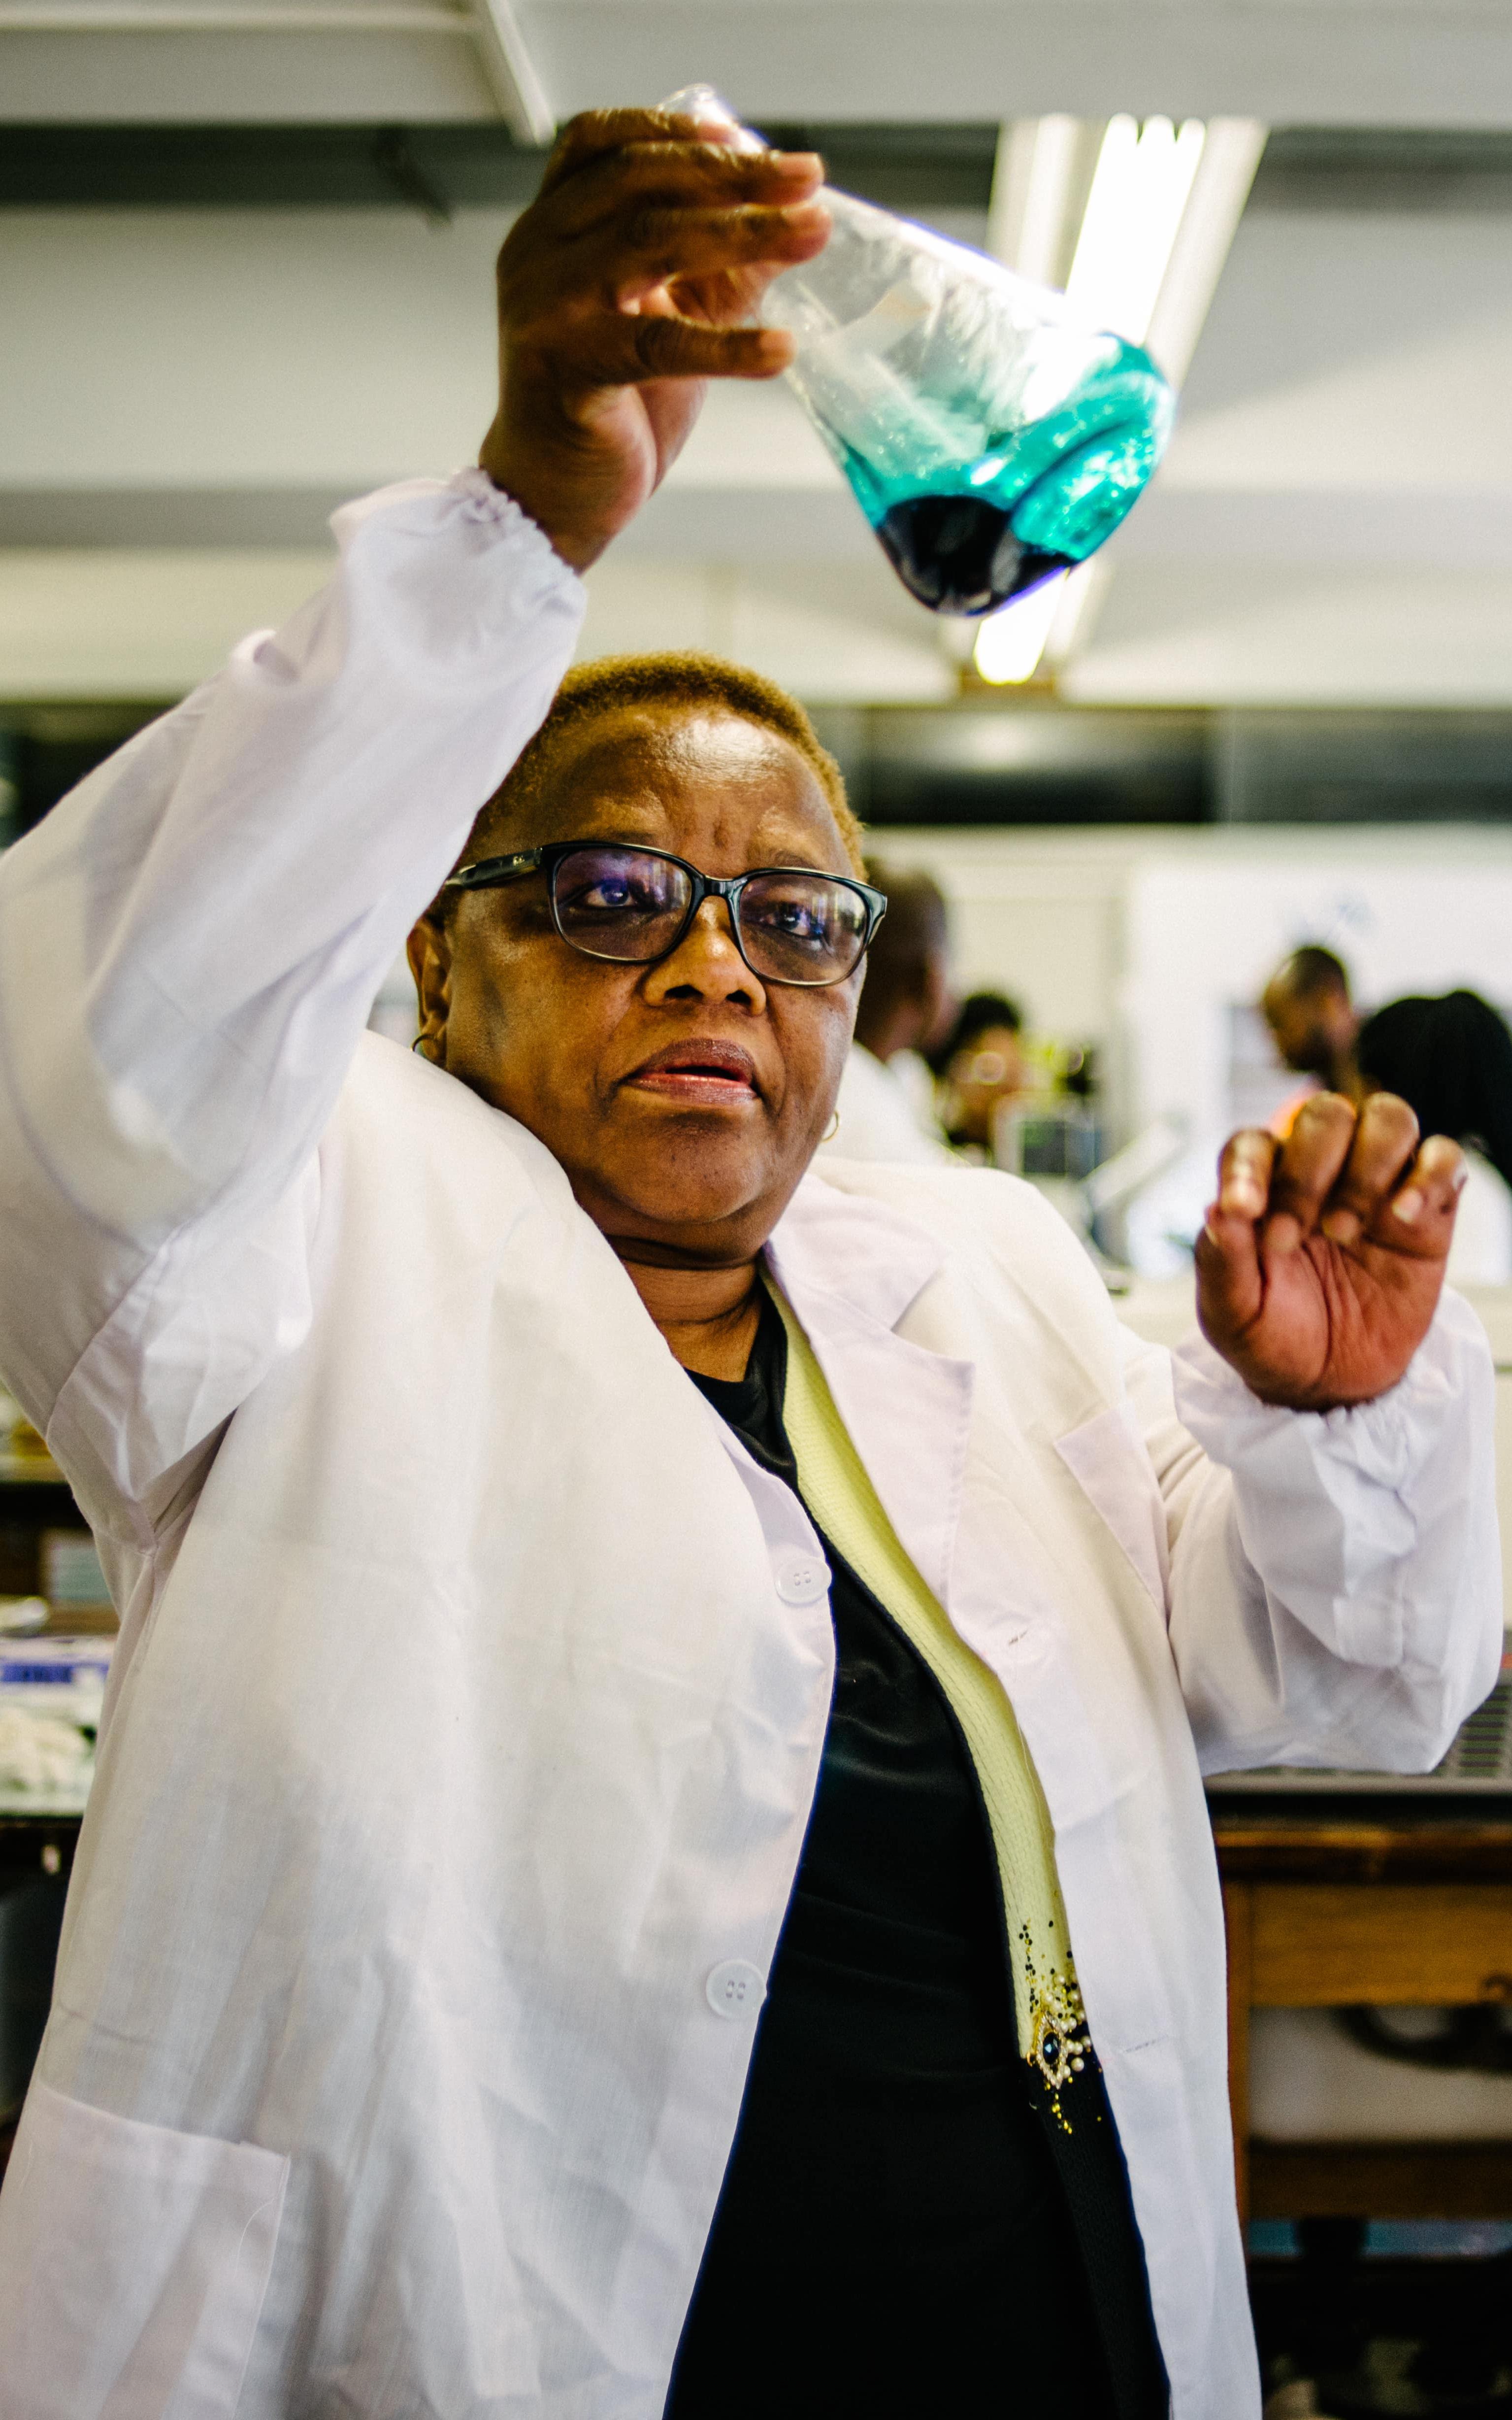 Black woman in a lab holds up a beaker containing liquid